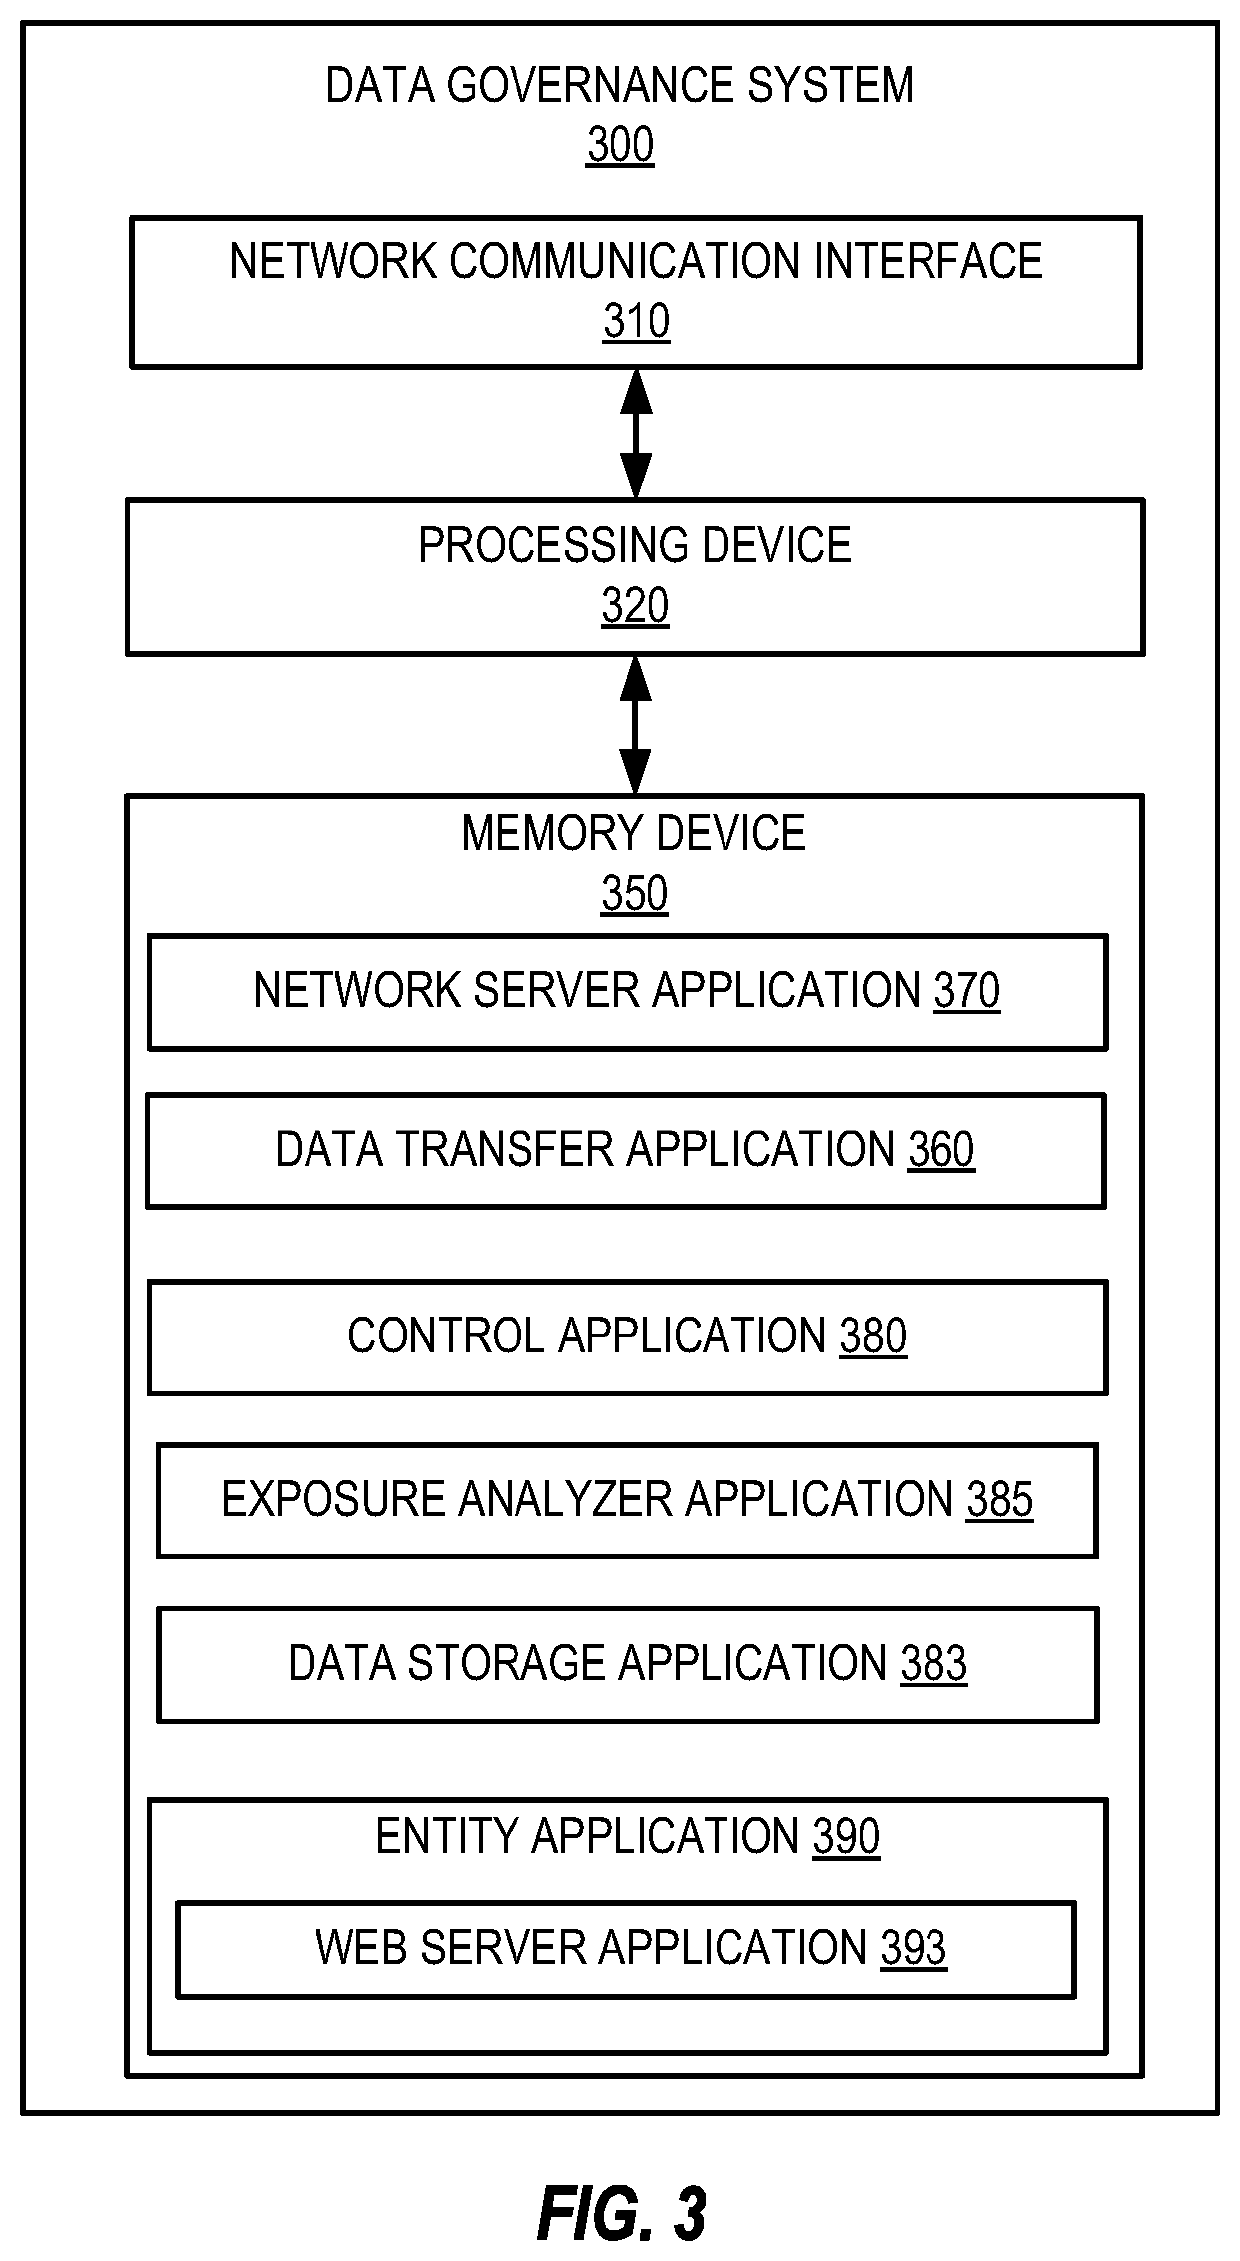 System for electronic data verification, storage, and transfer